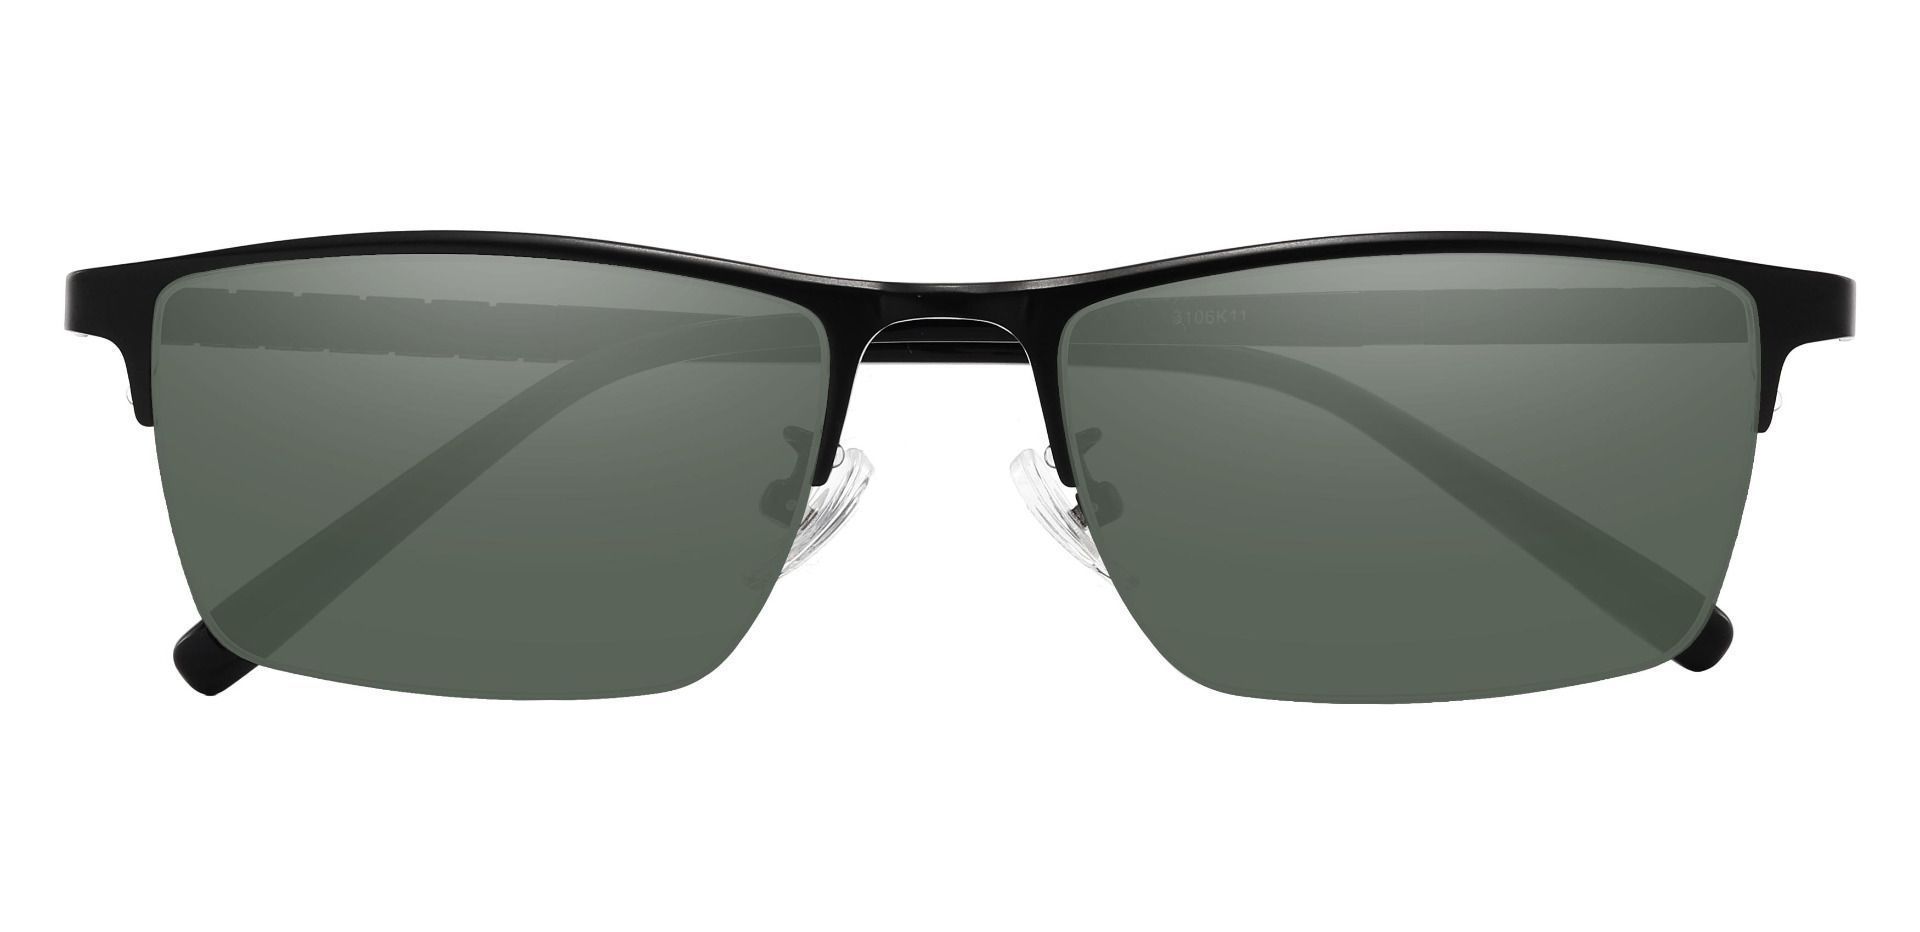 Maine Rectangle Non-Rx Sunglasses - Black Frame With Green Lenses